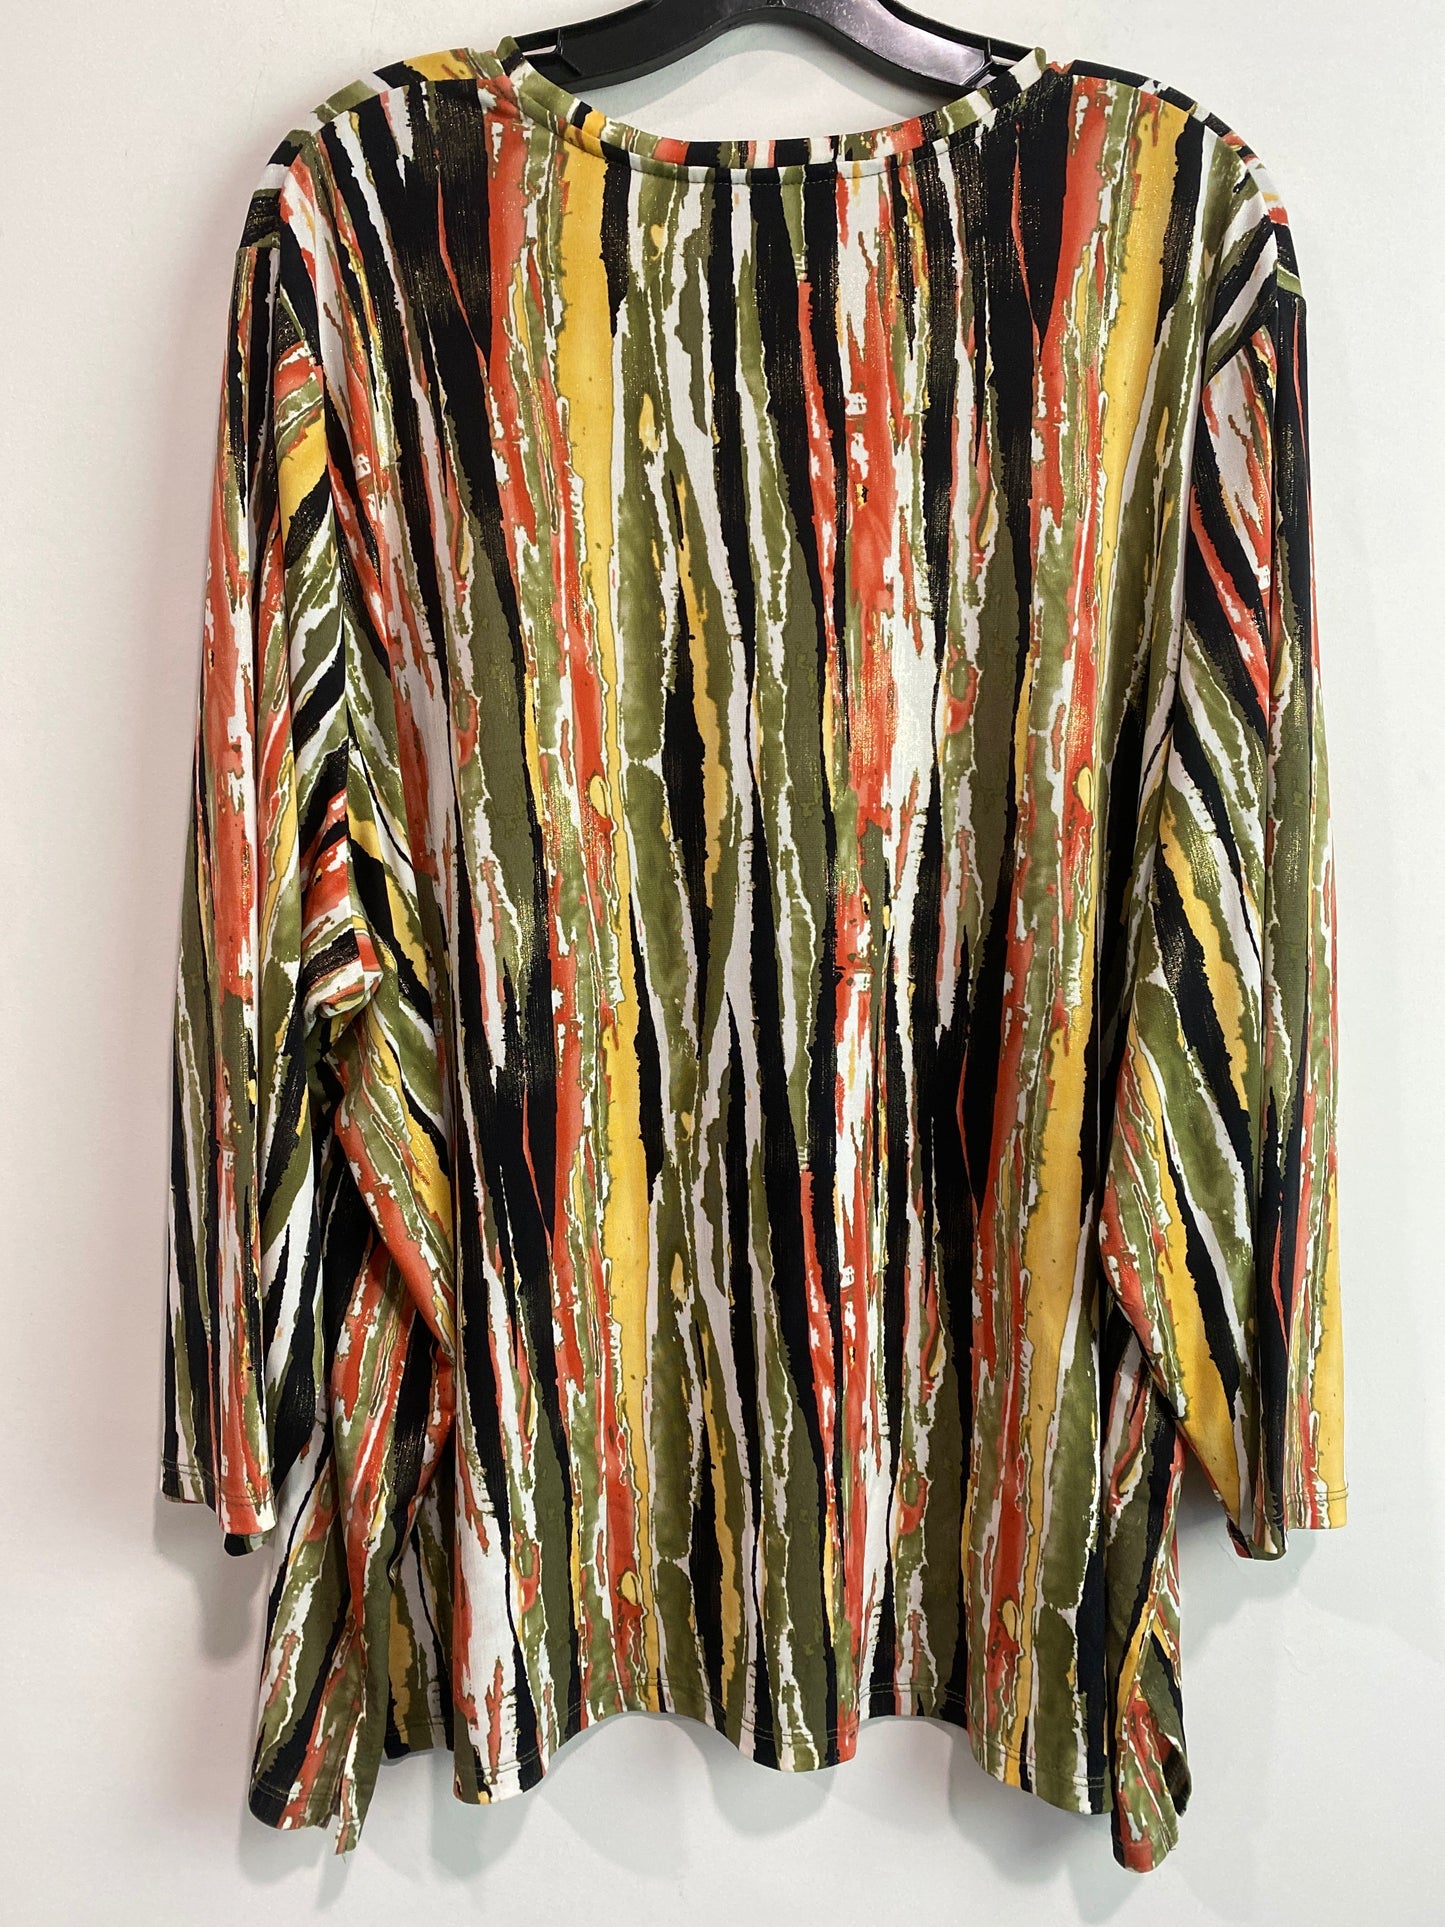 Green & Yellow Top 3/4 Sleeve Allison Daley, Size 3x